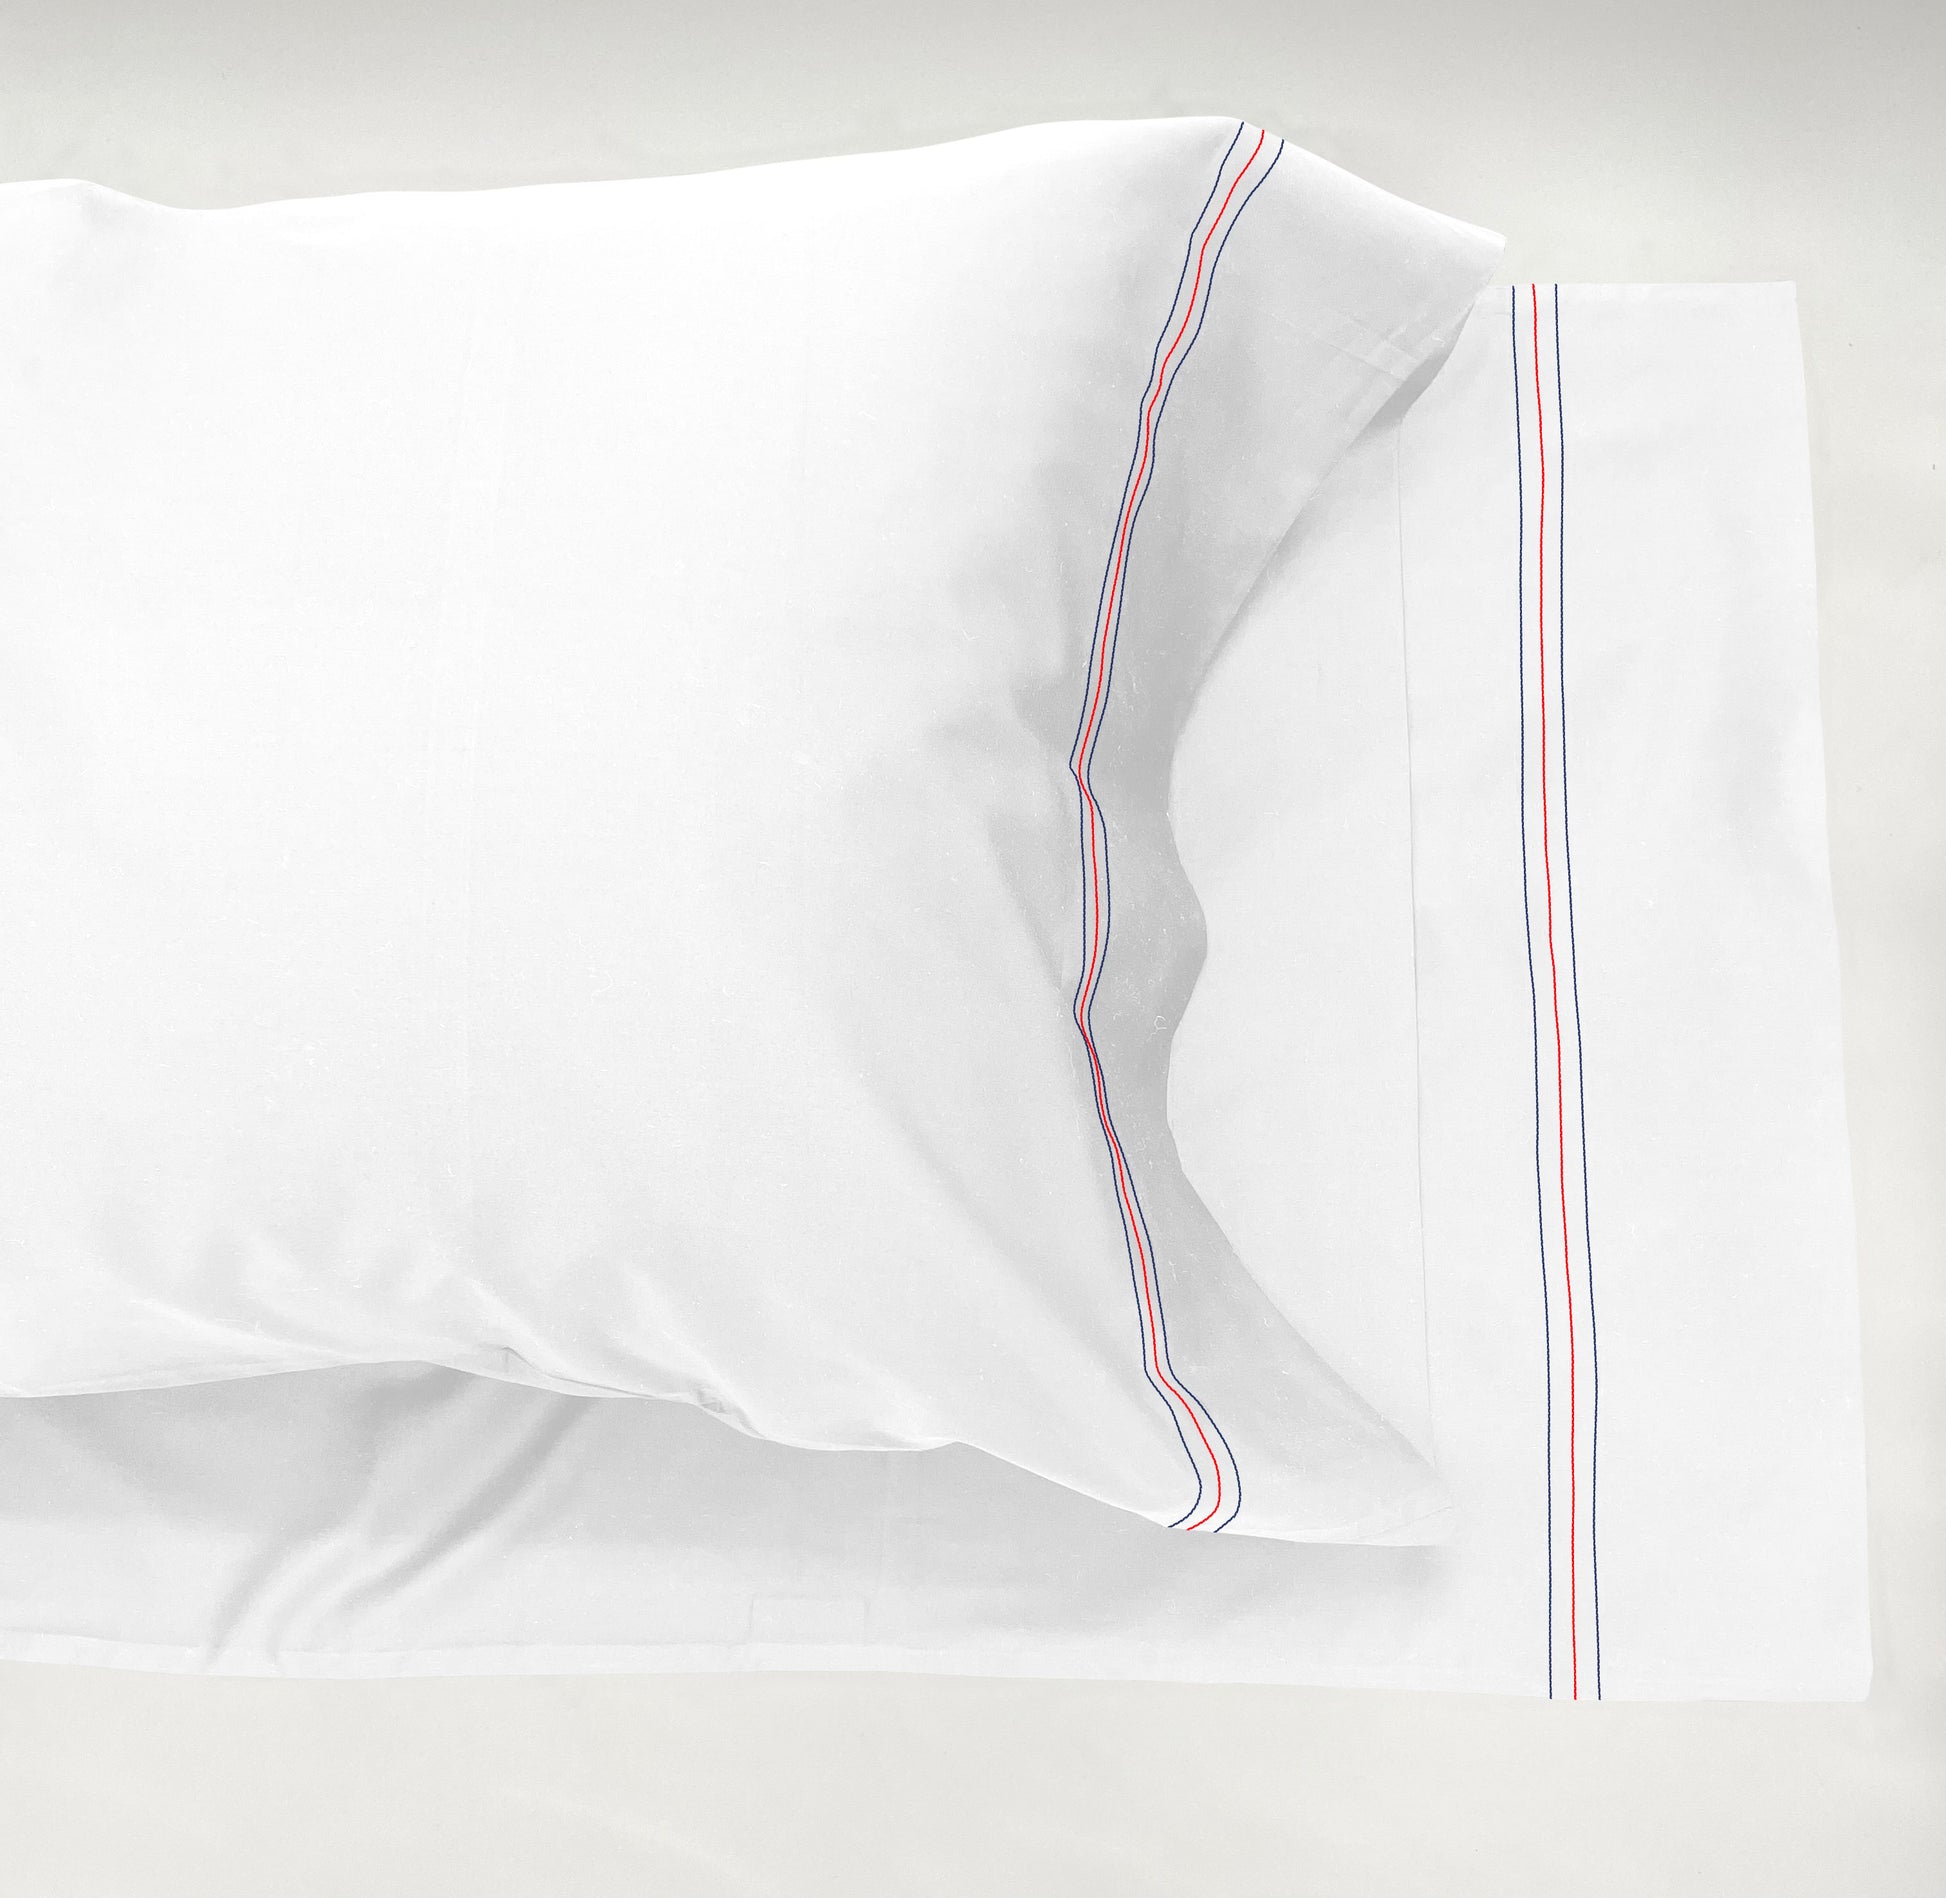 Narragansett White Pillow Case with a triple contrasting stitch in Deep Sea, Red and Deep Sea.